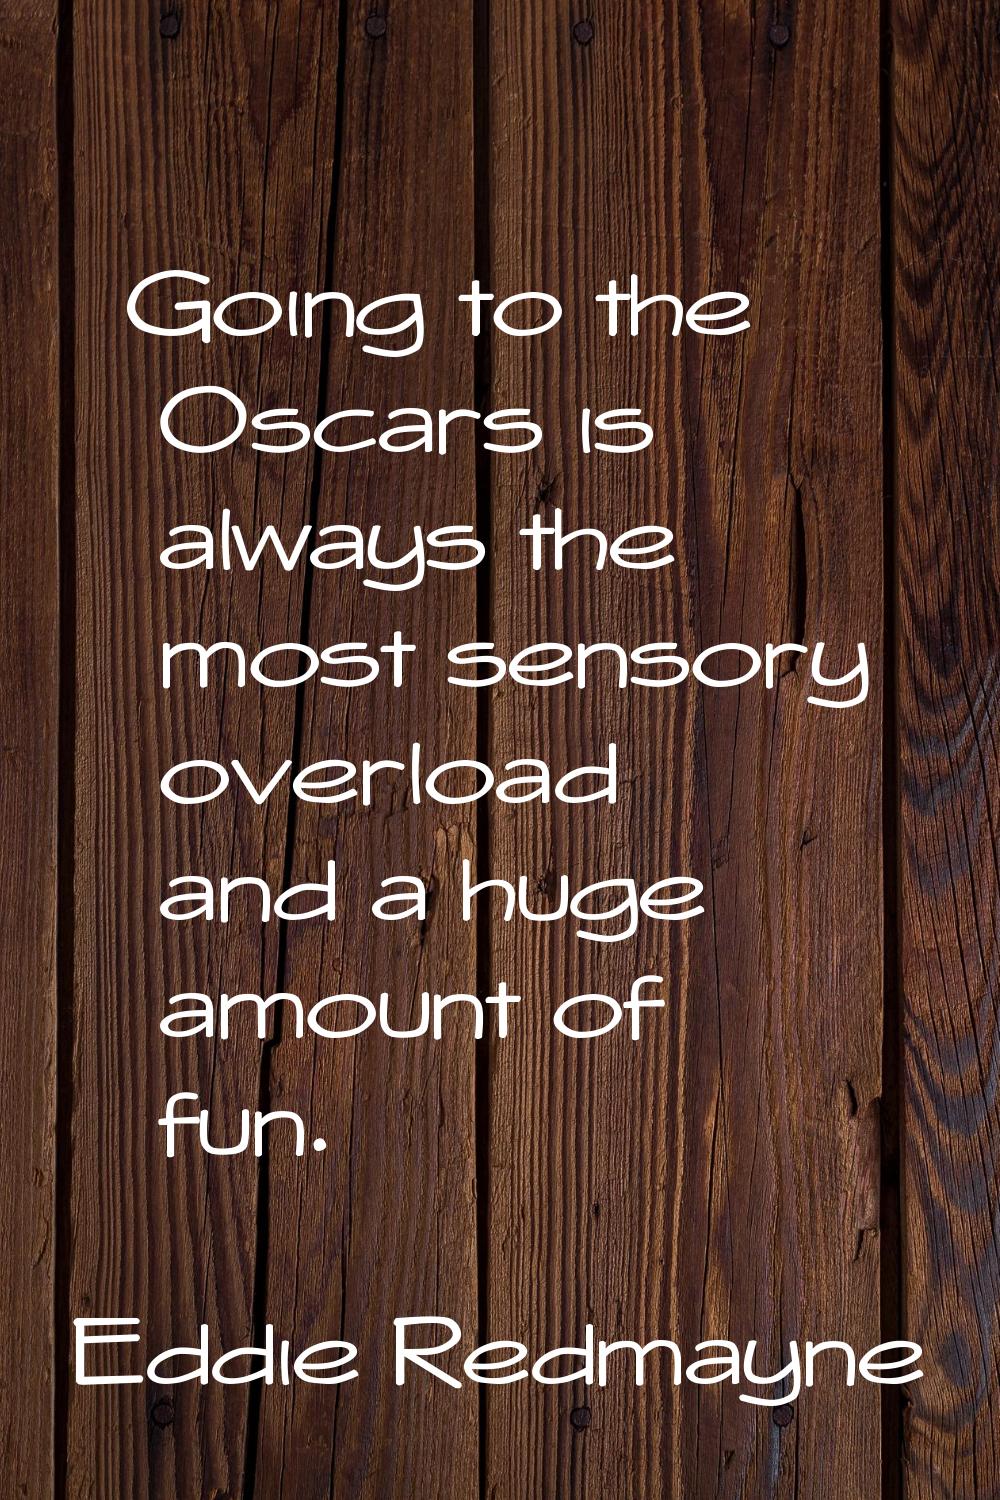 Going to the Oscars is always the most sensory overload and a huge amount of fun.